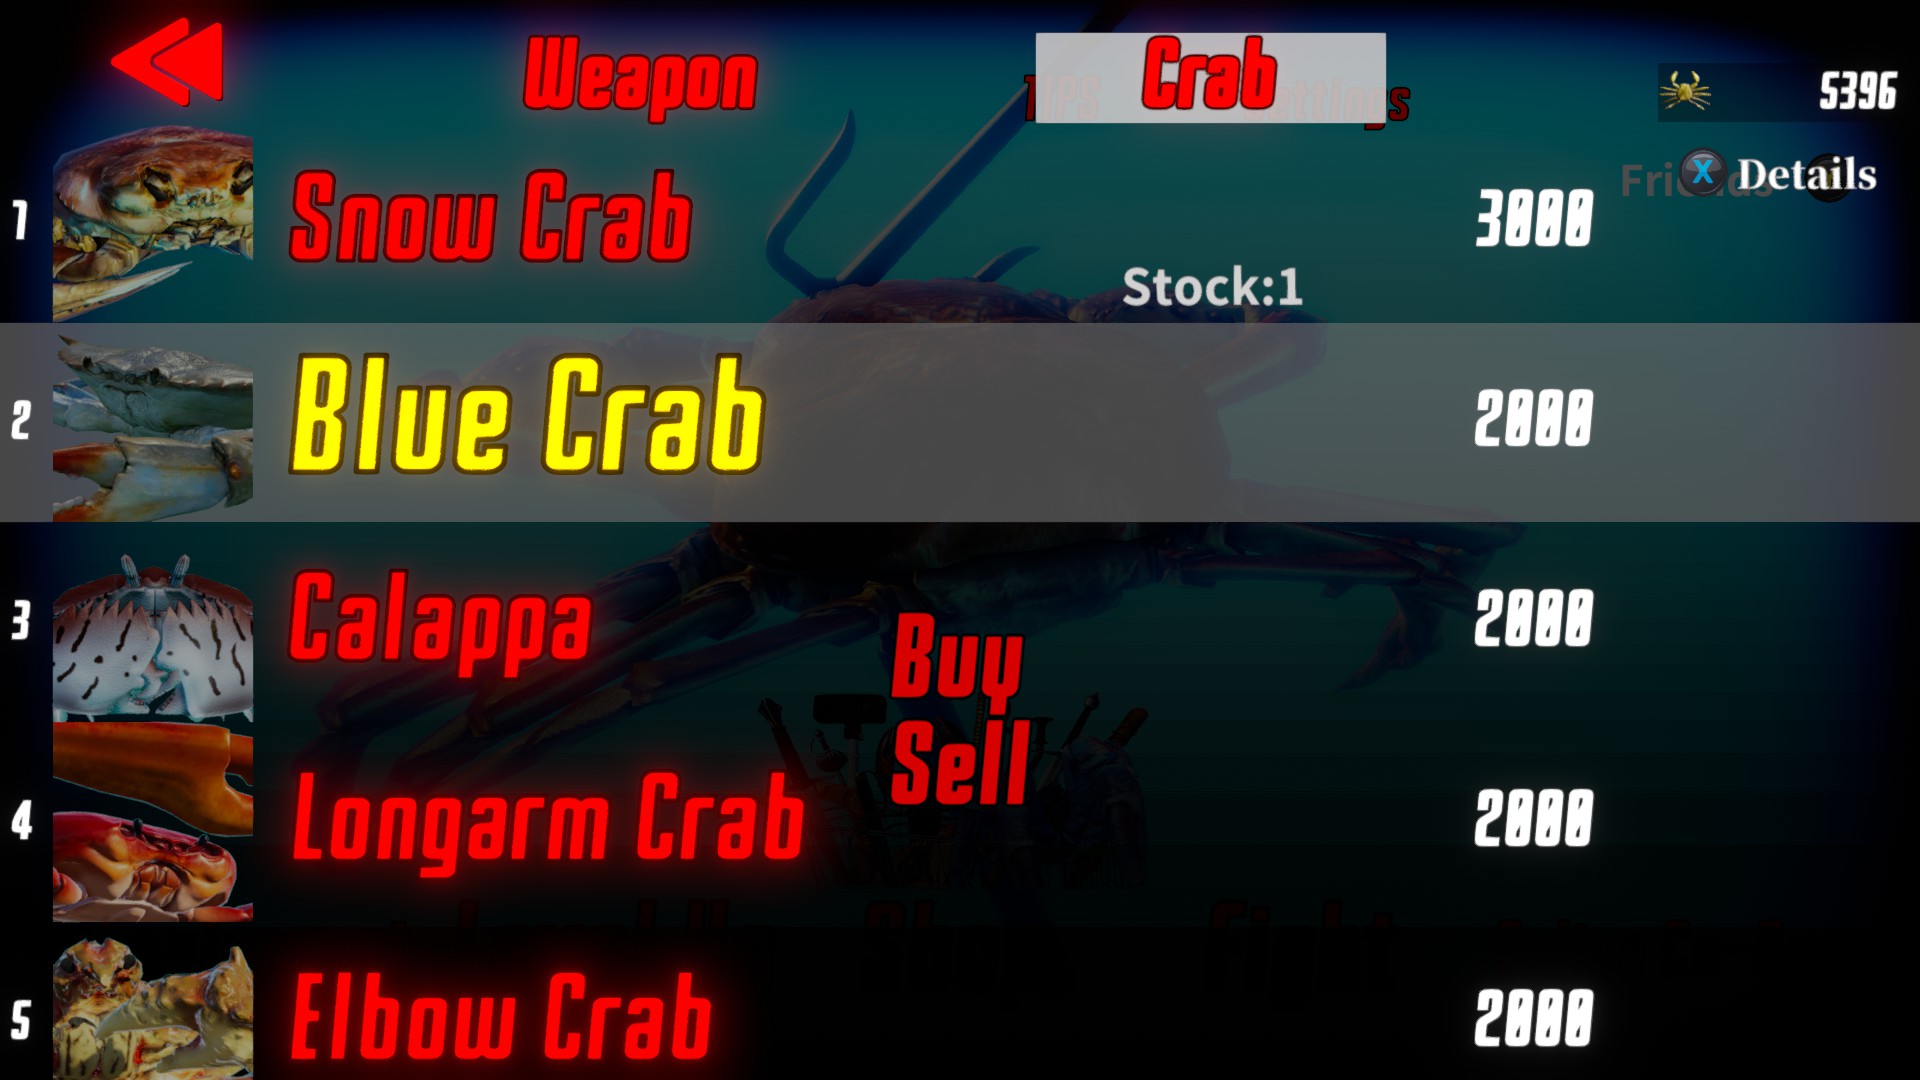 Fight Crab interface